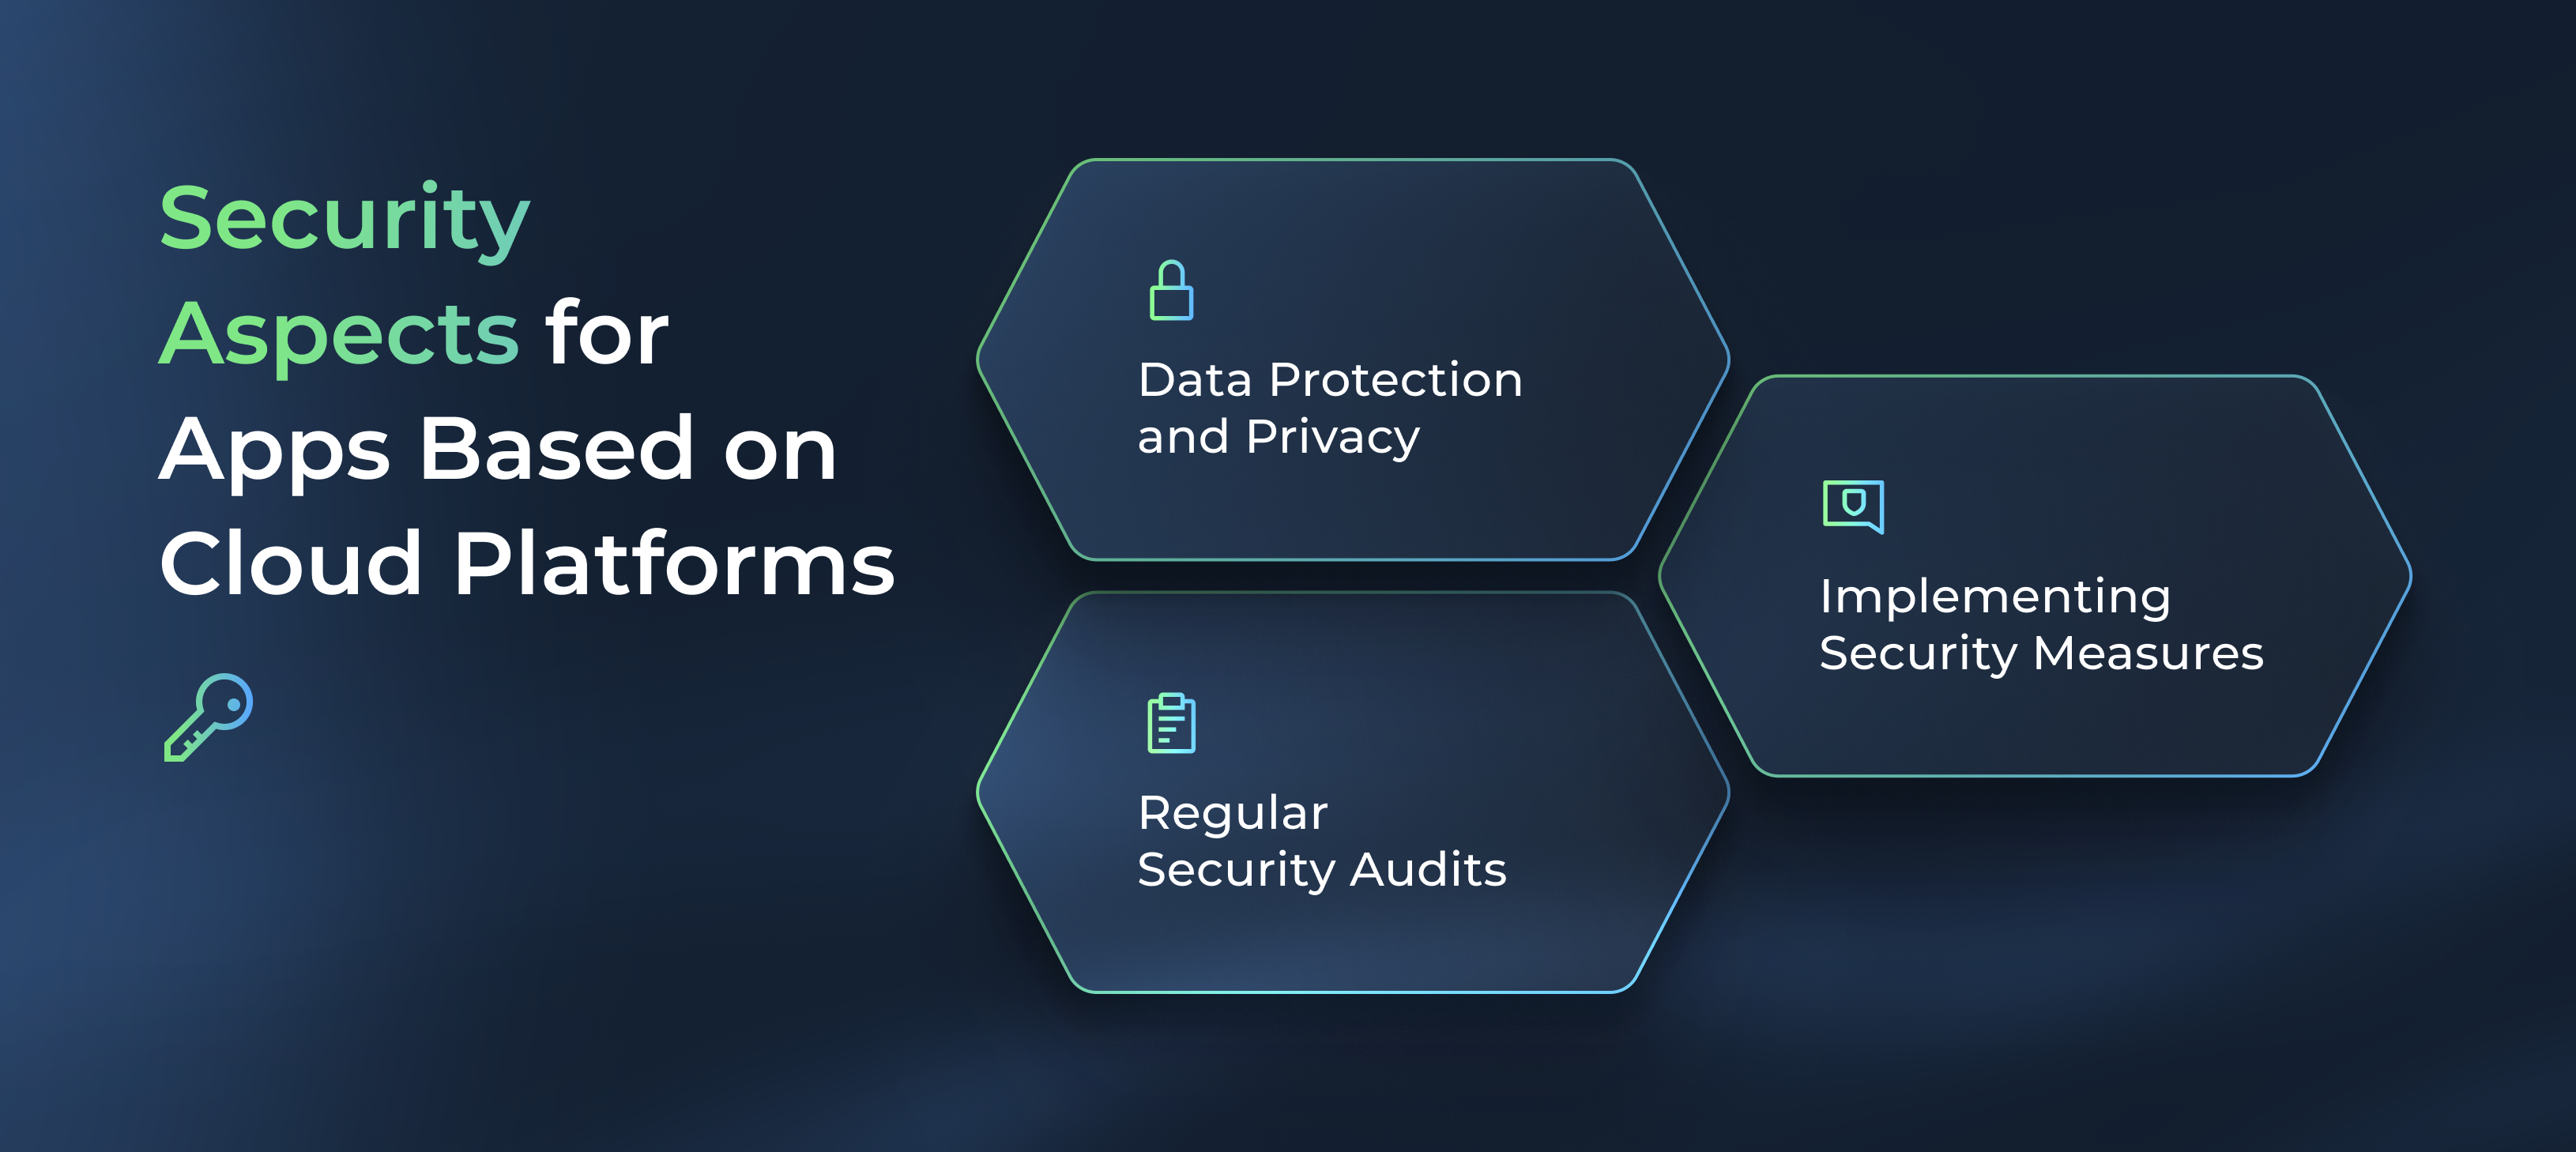 Security Aspects for Apps Based on Cloud Platforms
Data Protection and Privacy
Implementing Security Measures
Regular Security Audits
